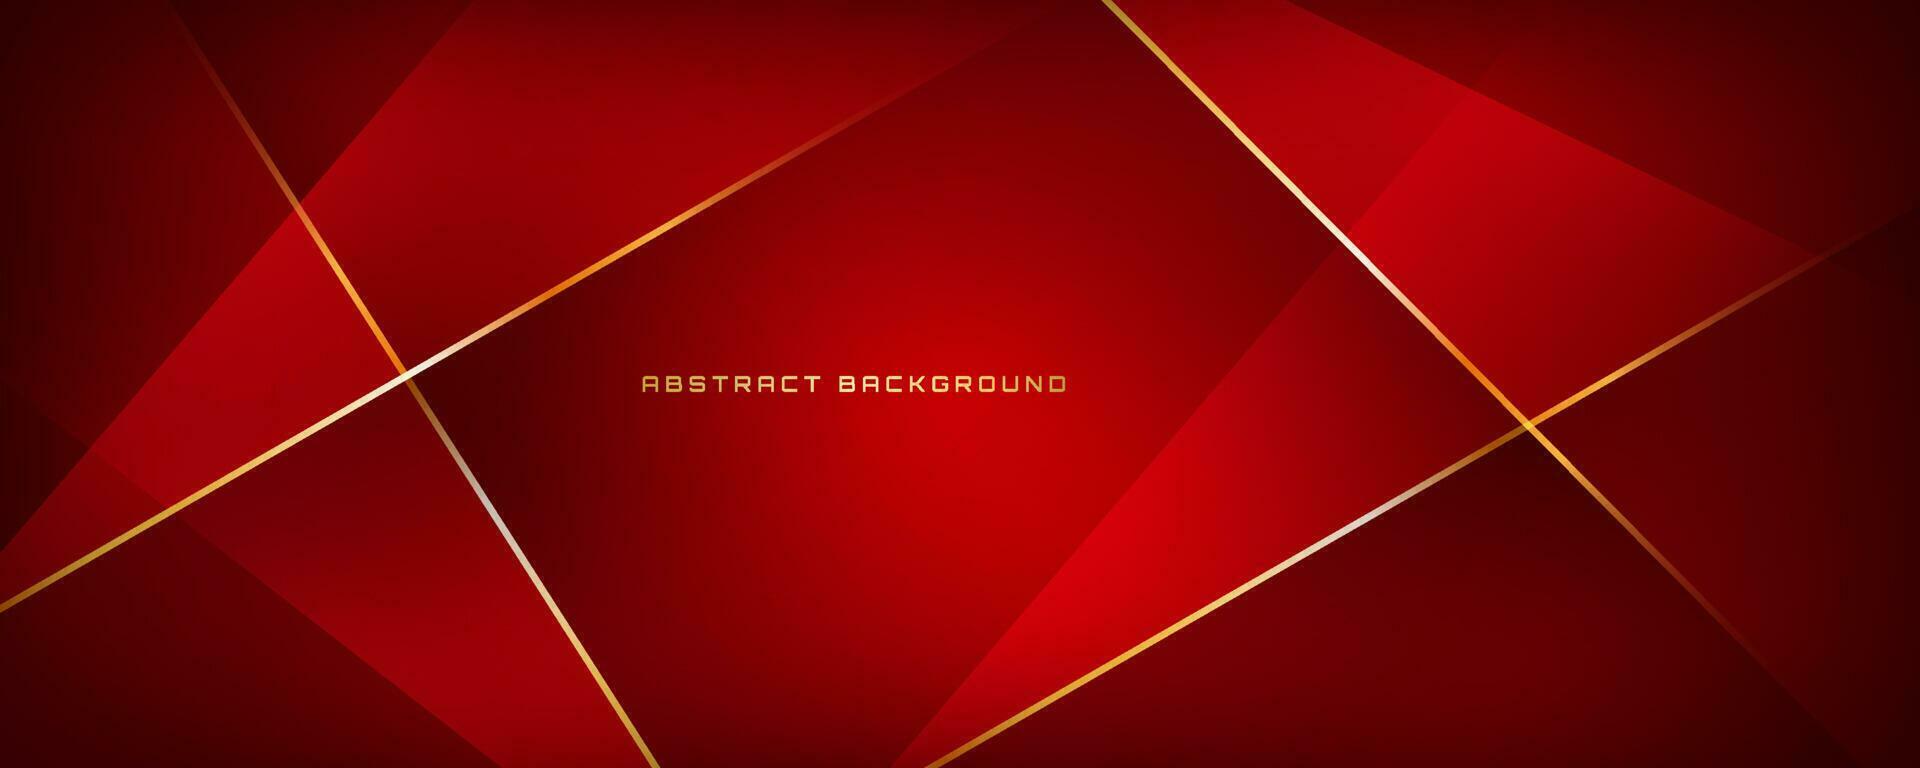 3D red luxury abstract background overlap layer on dark space with golden polygonal lines decoration. Modern graphic design element cutout style concept for banner, flyer, card, or brochure cover vector